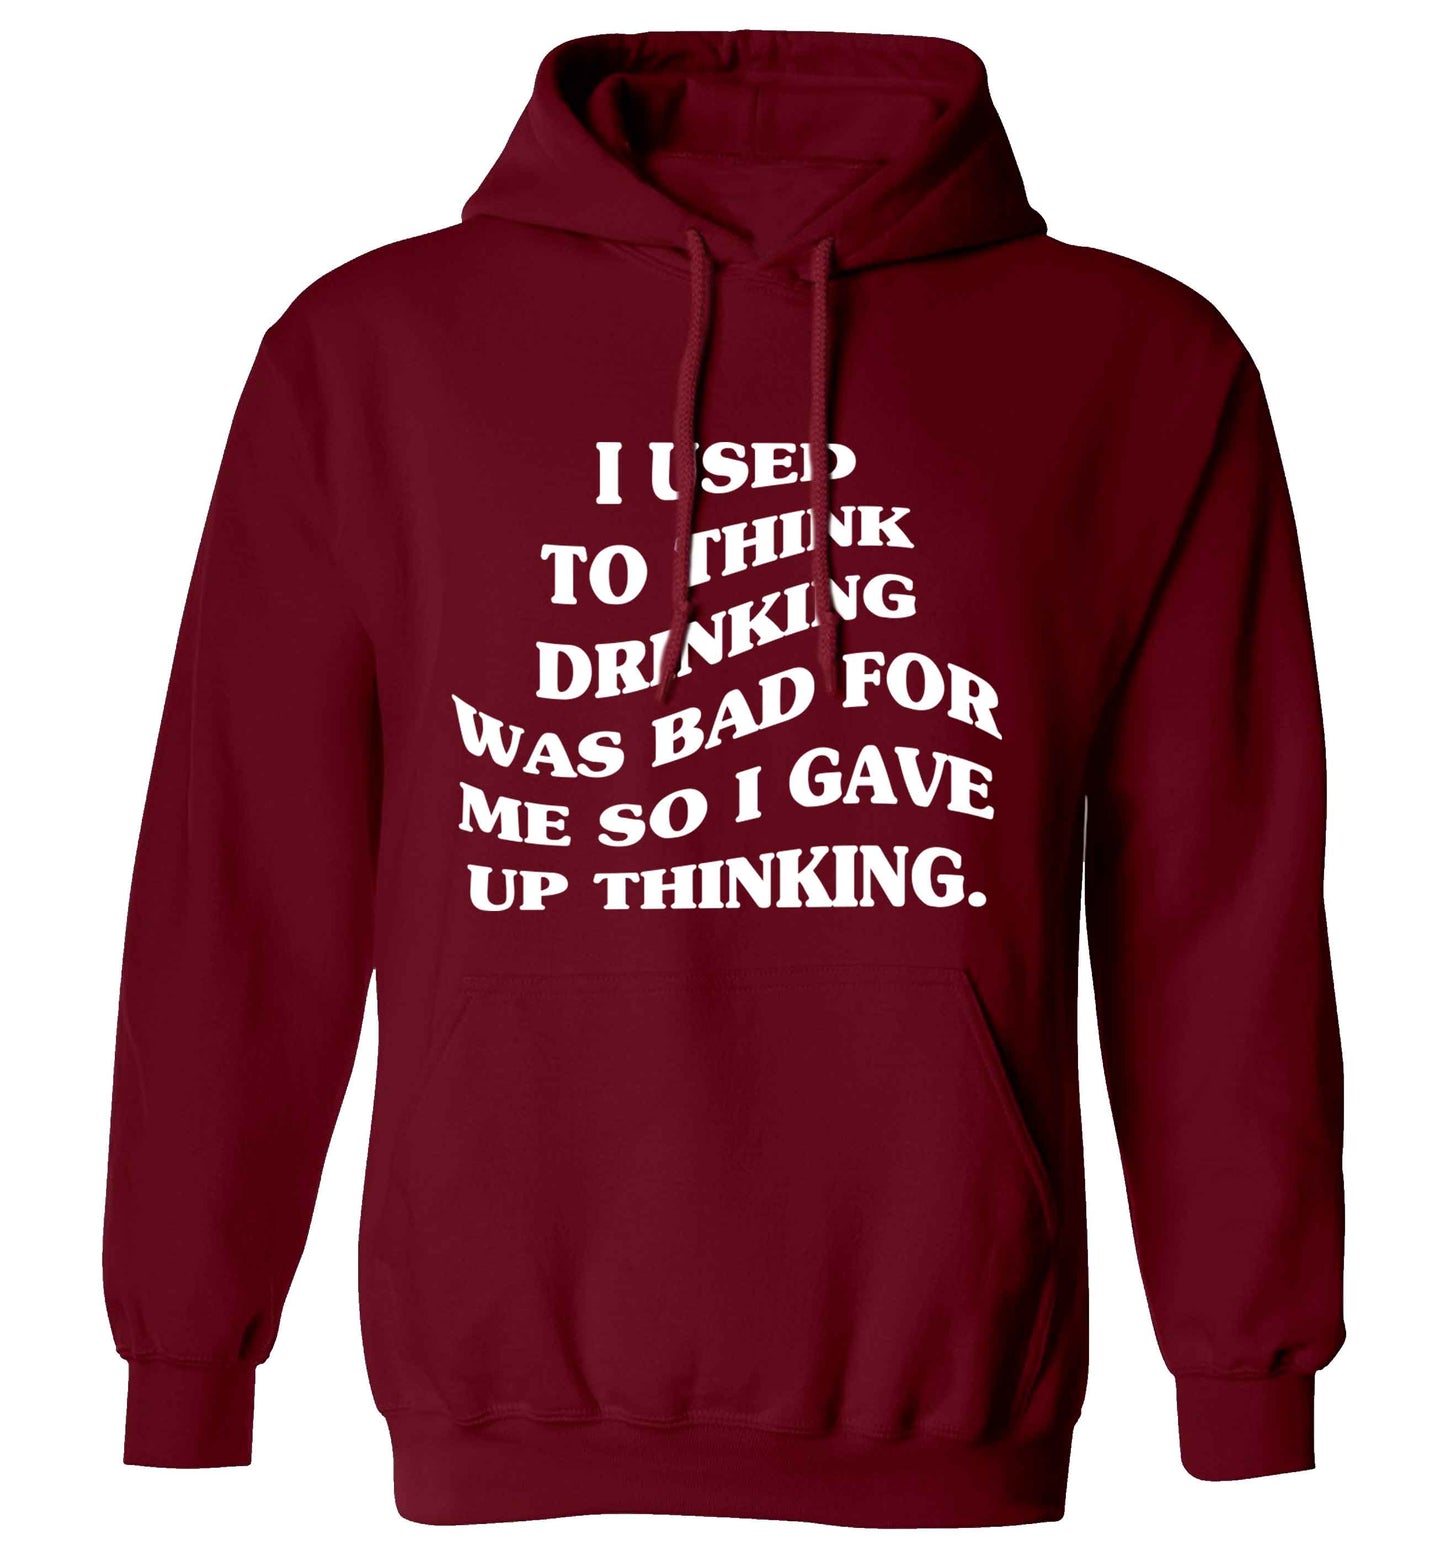 I used to think drinking was bad so I gave up thinking adults unisex maroon hoodie 2XL